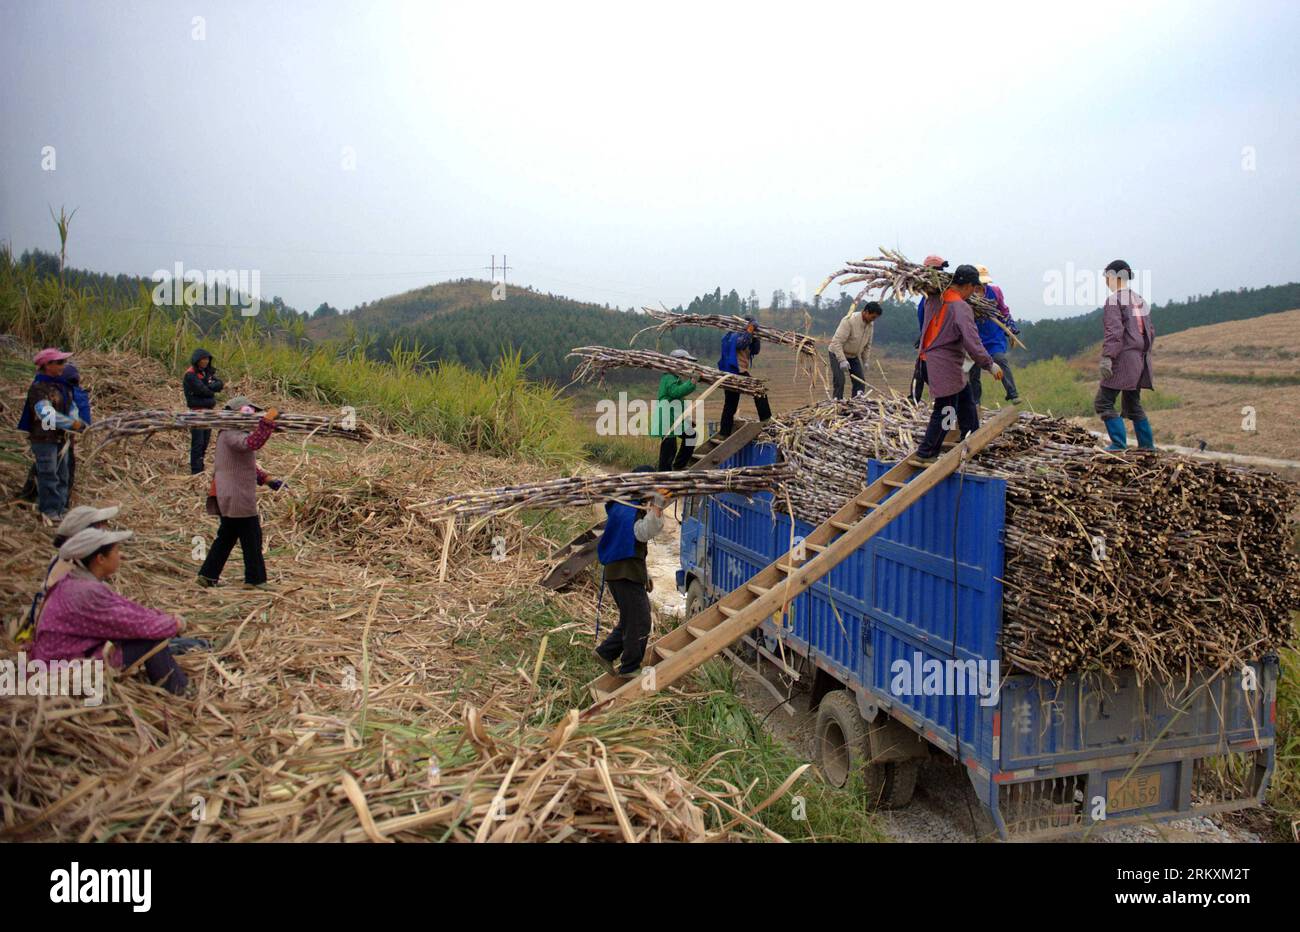 Bildnummer: 58974553  Datum: 08.01.2013  Copyright: imago/Xinhua (130108) -- RONGSHUI, Jan. 8, 2013 (Xinhua) -- Farmers load sugarcanes onto the truck in Rongshui Town of Rongshui County, southwest China s Guangxi Zhuang Autonomous Region, Jan. 8, 2013. Cold weather has caused damages to sugarcanes in Guangxi over the past days. Farmers are harvesting sugarcanes to avoid further losses. Weather forecast has showed that a fairly strong cold wave will hit the region on Jan. 9-12. (Xinhua/Zhang Ailin) (jm) CHINA-GUANGXI-RONGSHUI-COLD WEATHER-SUGARCANE HARVEST (CN) PUBLICATIONxNOTxINxCHN Gesellsch Stock Photo